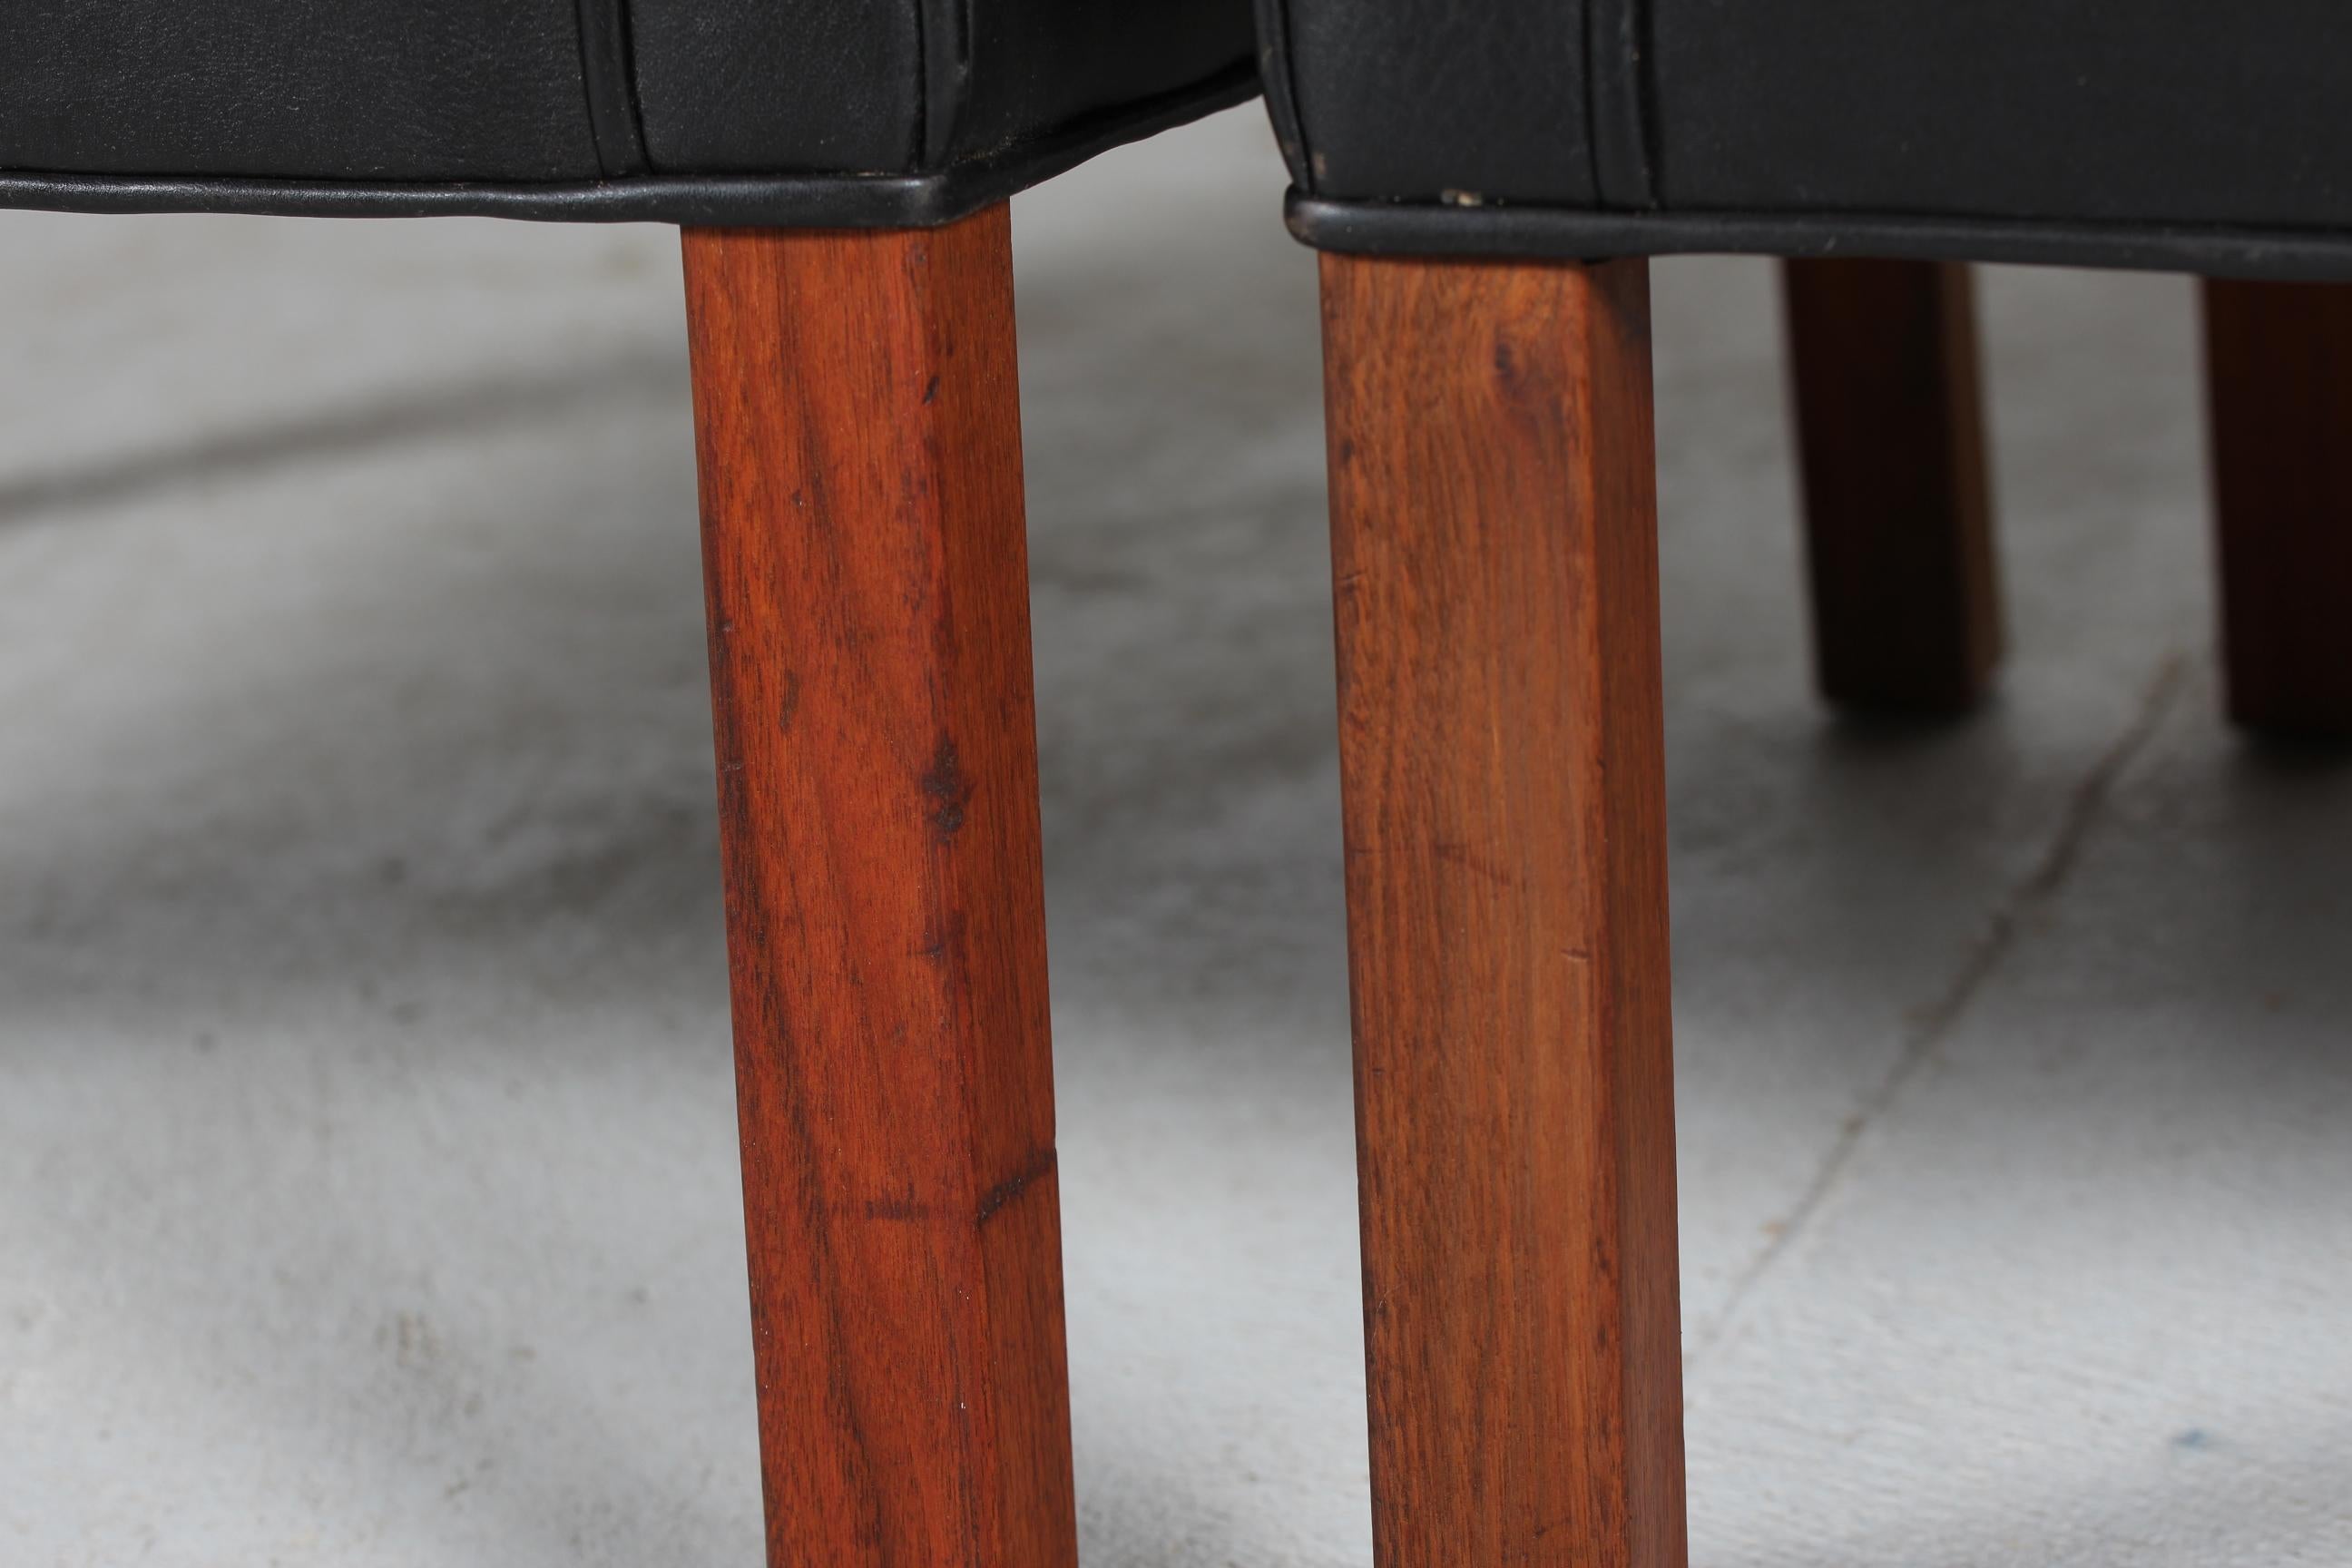 Børge Mogensen Pair of Chairs 2204 with Black Leather by Fredericia Stolefabrik For Sale 2